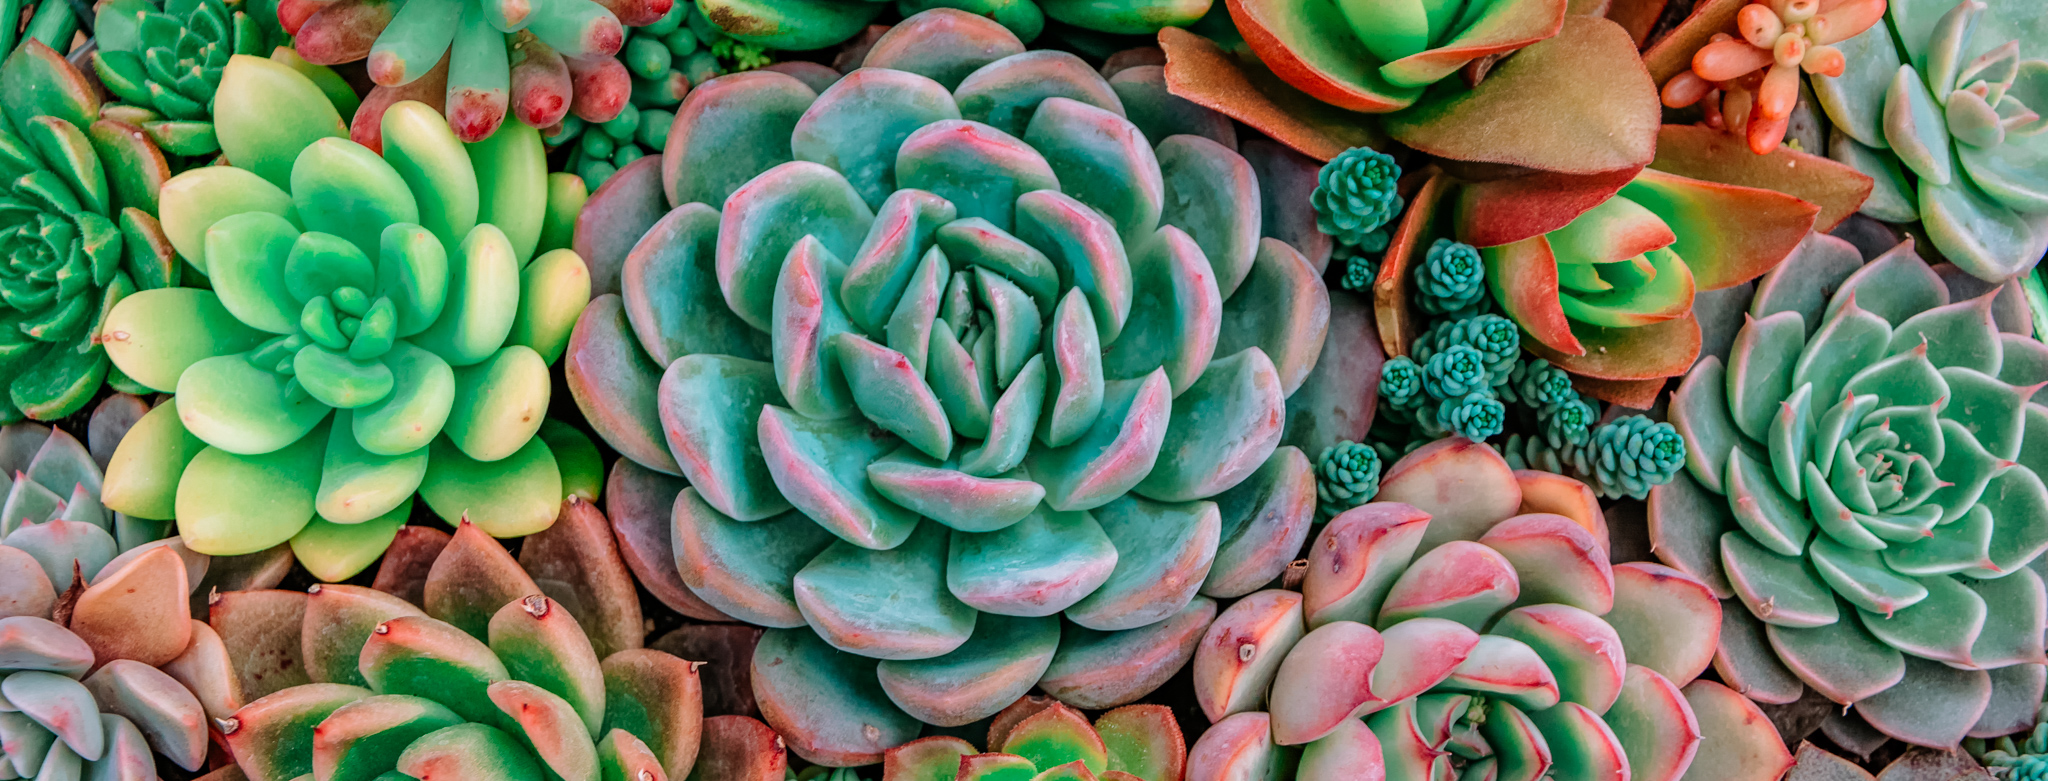 How to Care for Your Succulent - Ashland Addison Florist Company